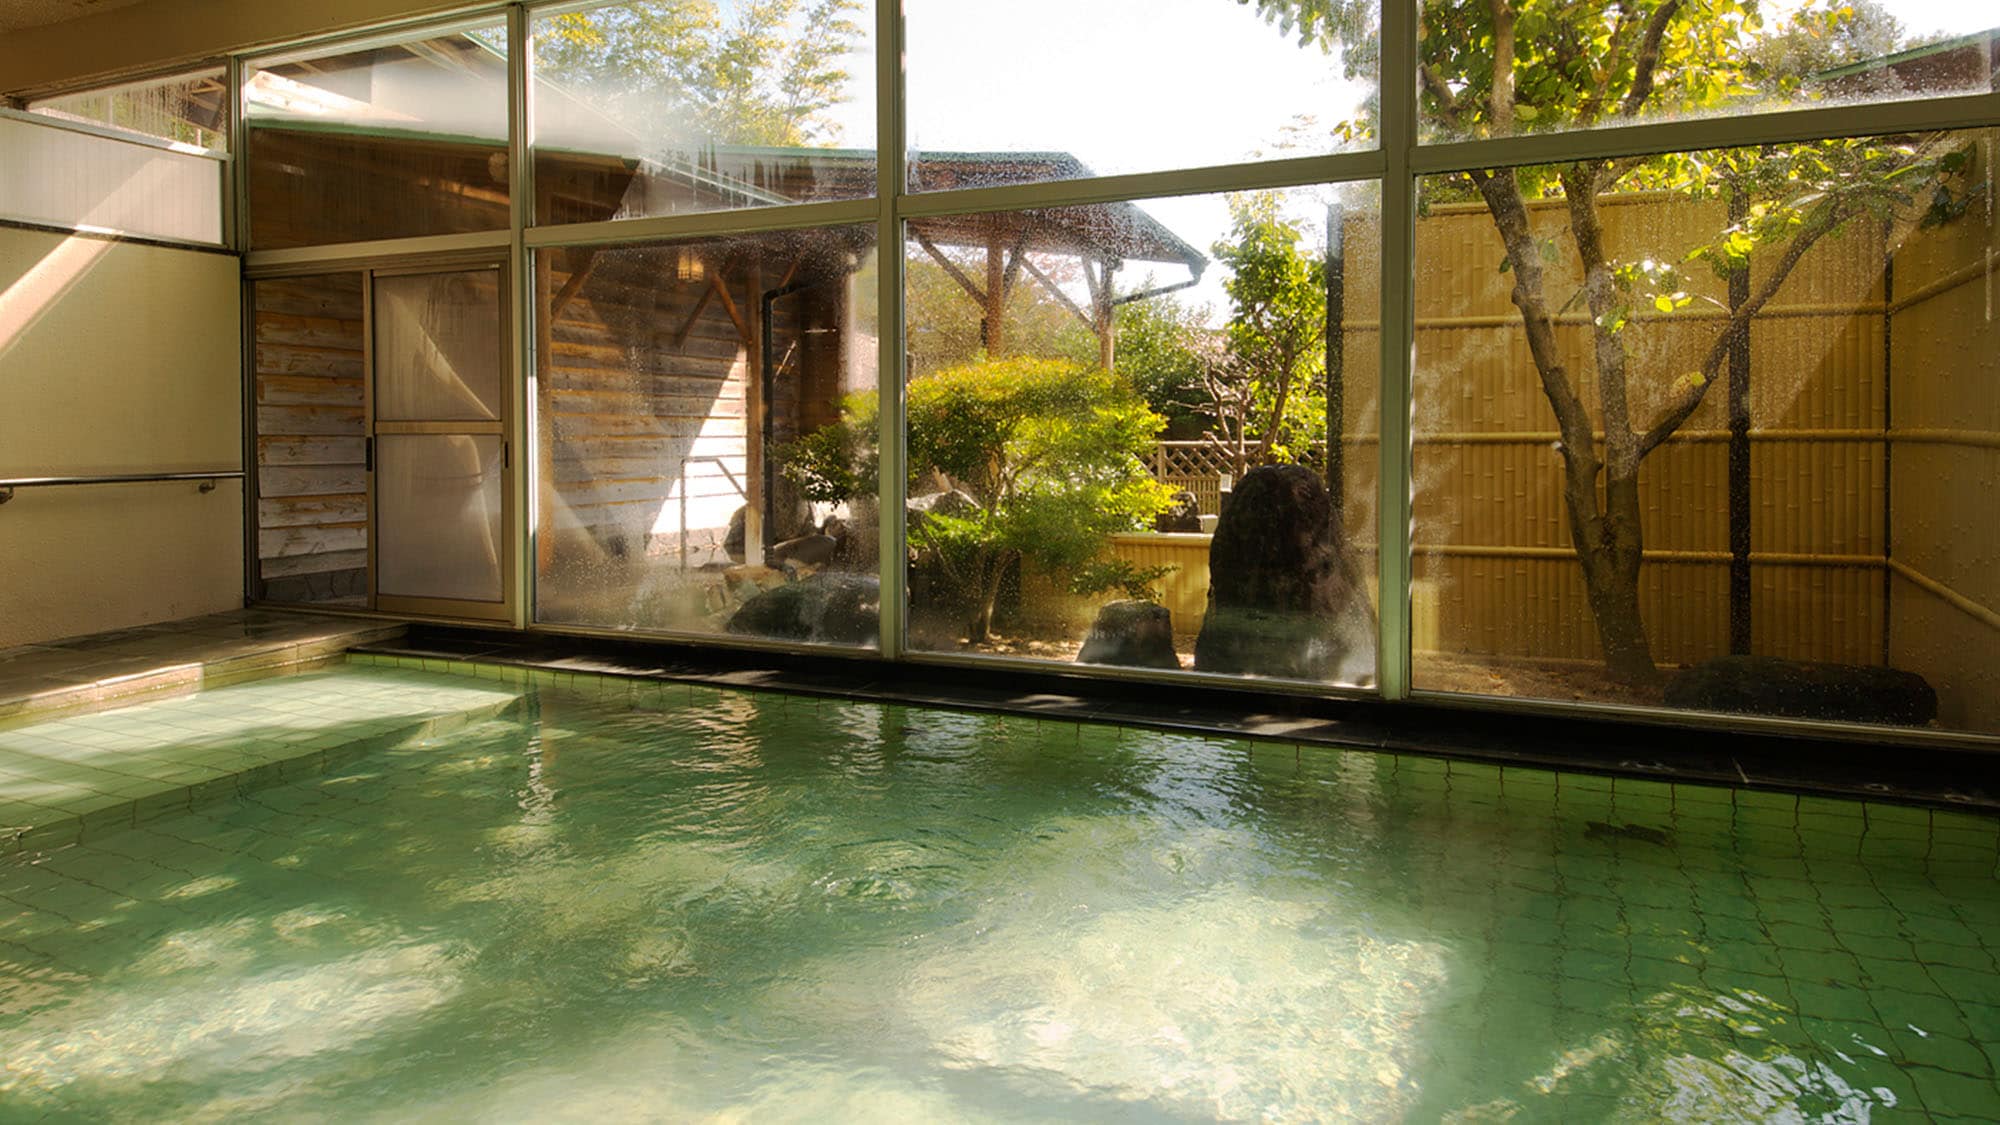 ■ Large communal bath ■ Among the Awara hot springs, the mellow spring quality is popular ♪ Use up to your shoulders & ldquo;